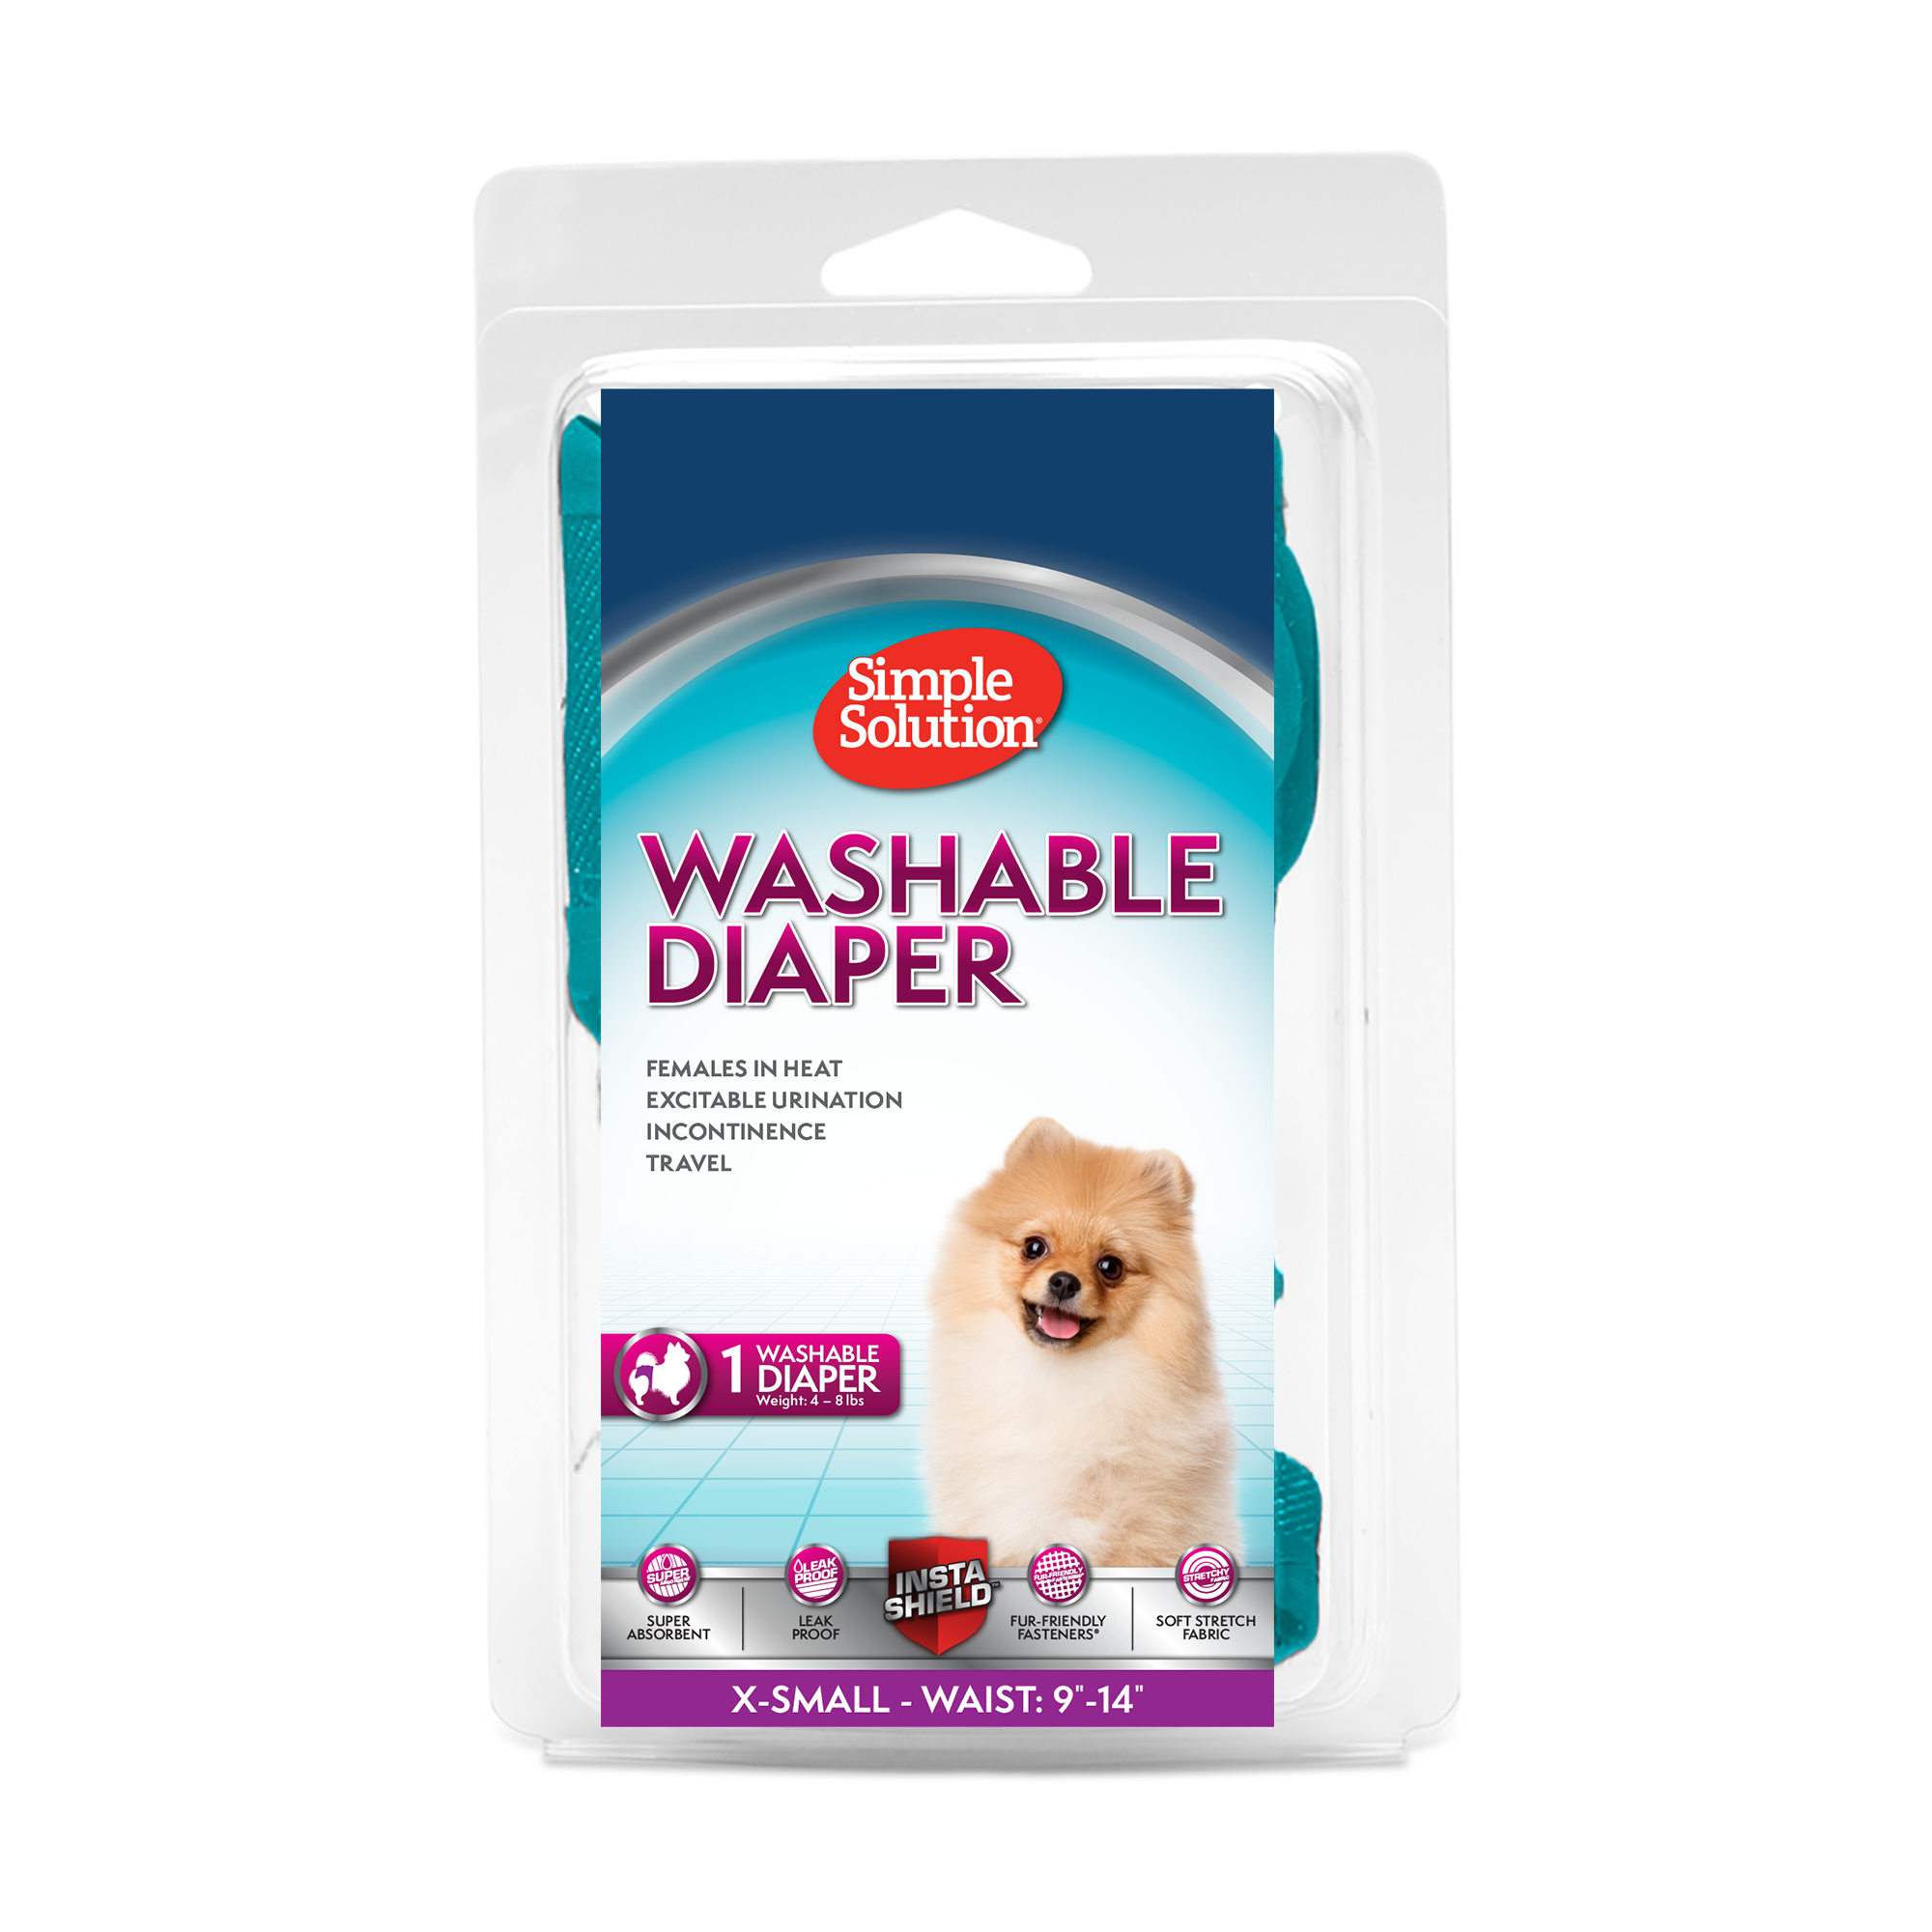 Excitable Urination or Incontinence 1 Re-usable Dog Diaper Per Pack XS Simple Solution Washable Re-usable Female Dog Diapers Absorbent with Leak Proof Fit 